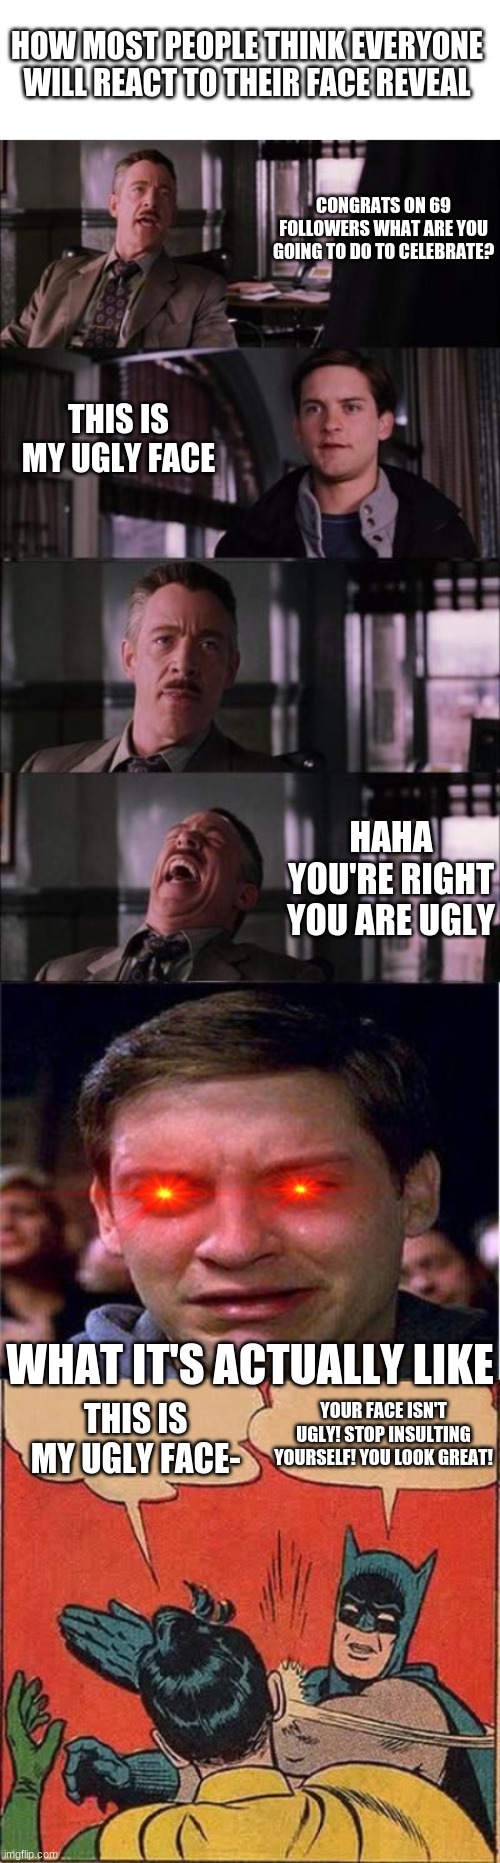 A meme about face reveals | HOW MOST PEOPLE THINK EVERYONE WILL REACT TO THEIR FACE REVEAL; CONGRATS ON 69 FOLLOWERS WHAT ARE YOU GOING TO DO TO CELEBRATE? THIS IS MY UGLY FACE; HAHA YOU'RE RIGHT YOU ARE UGLY; WHAT IT'S ACTUALLY LIKE; YOUR FACE ISN'T UGLY! STOP INSULTING YOURSELF! YOU LOOK GREAT! THIS IS MY UGLY FACE- | image tagged in blank text box,memes,peter parker cry,batman slapping robin | made w/ Imgflip meme maker